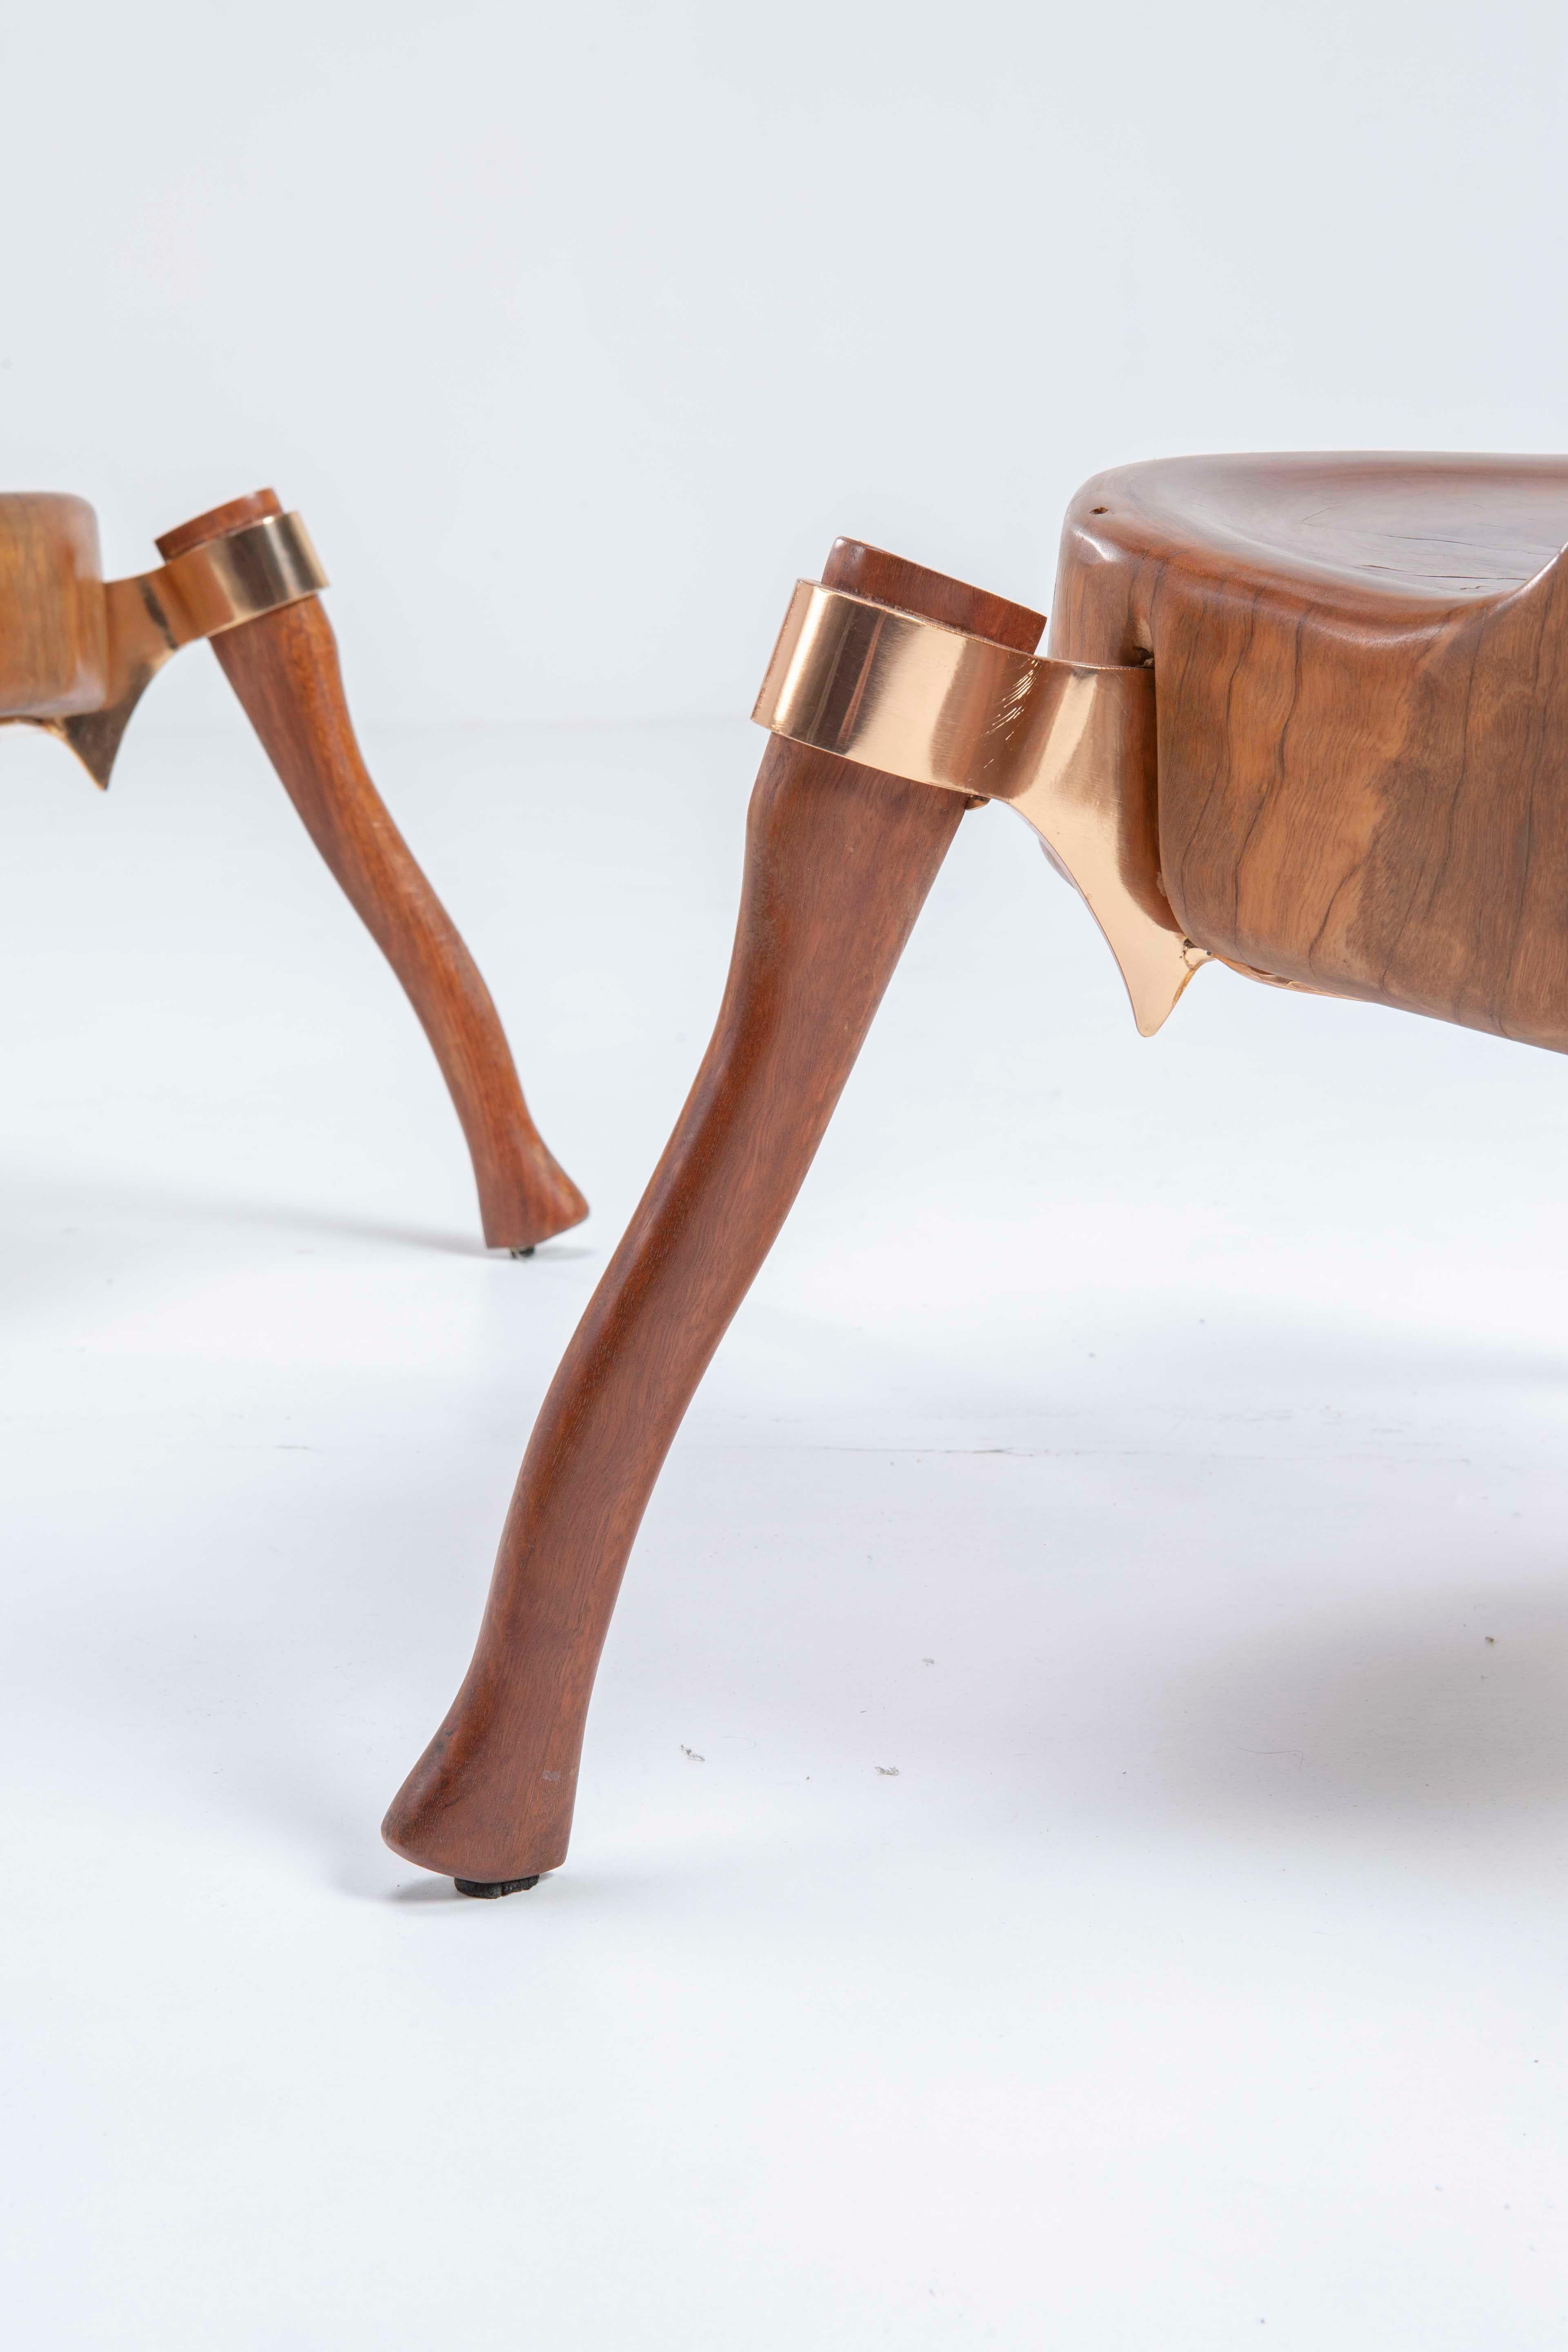 Wood Léo Capote pair of stunning Cadeira Machado stools - Numbered and signed - 2015 For Sale